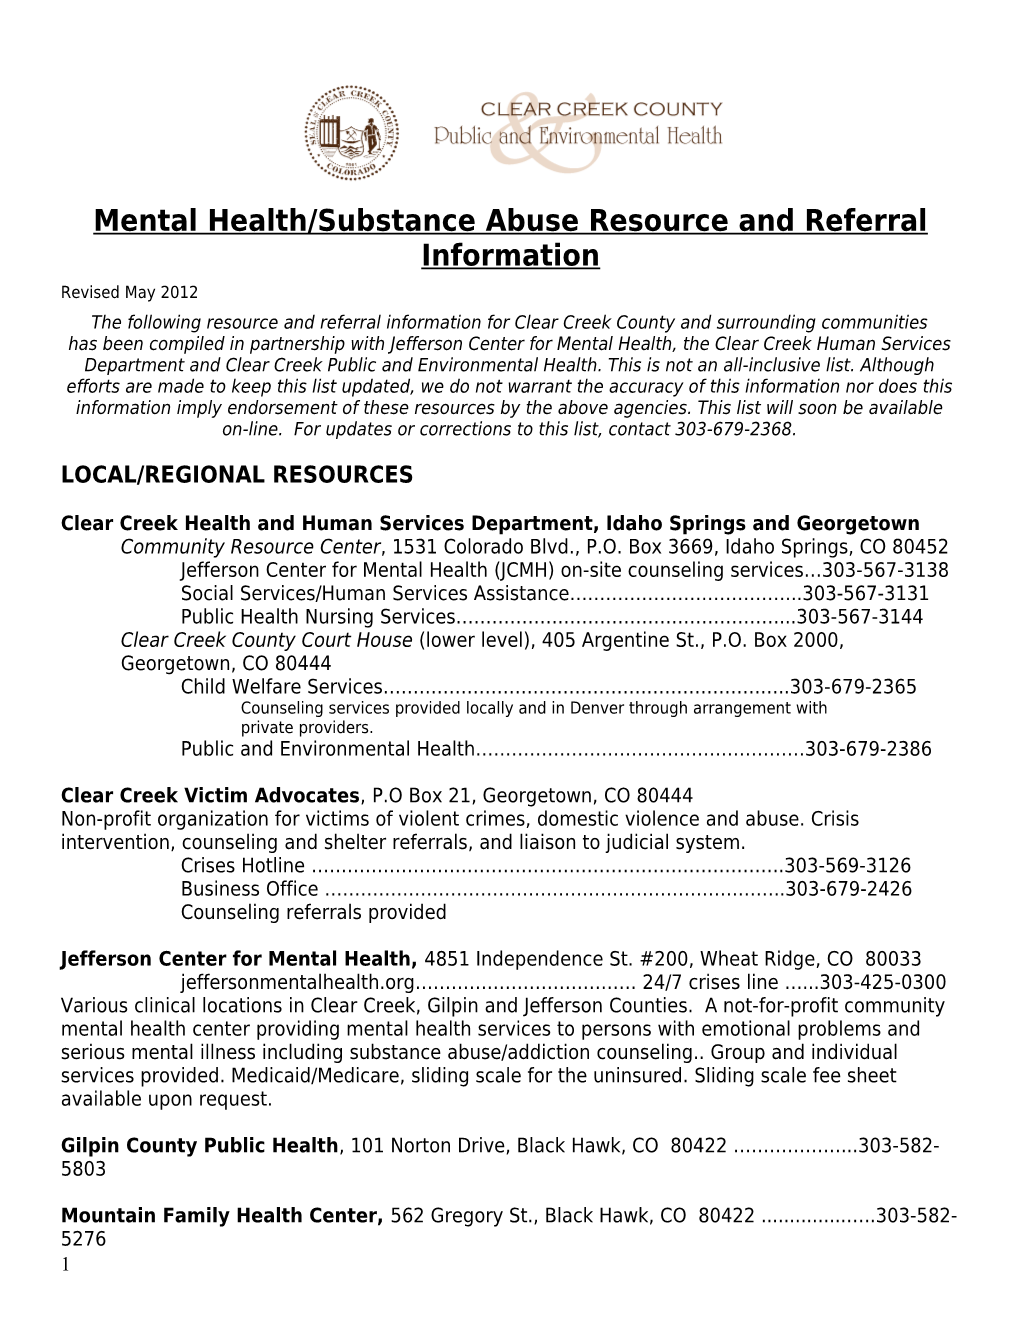 Mental Health/Substance Abuse Resource and Referral Information